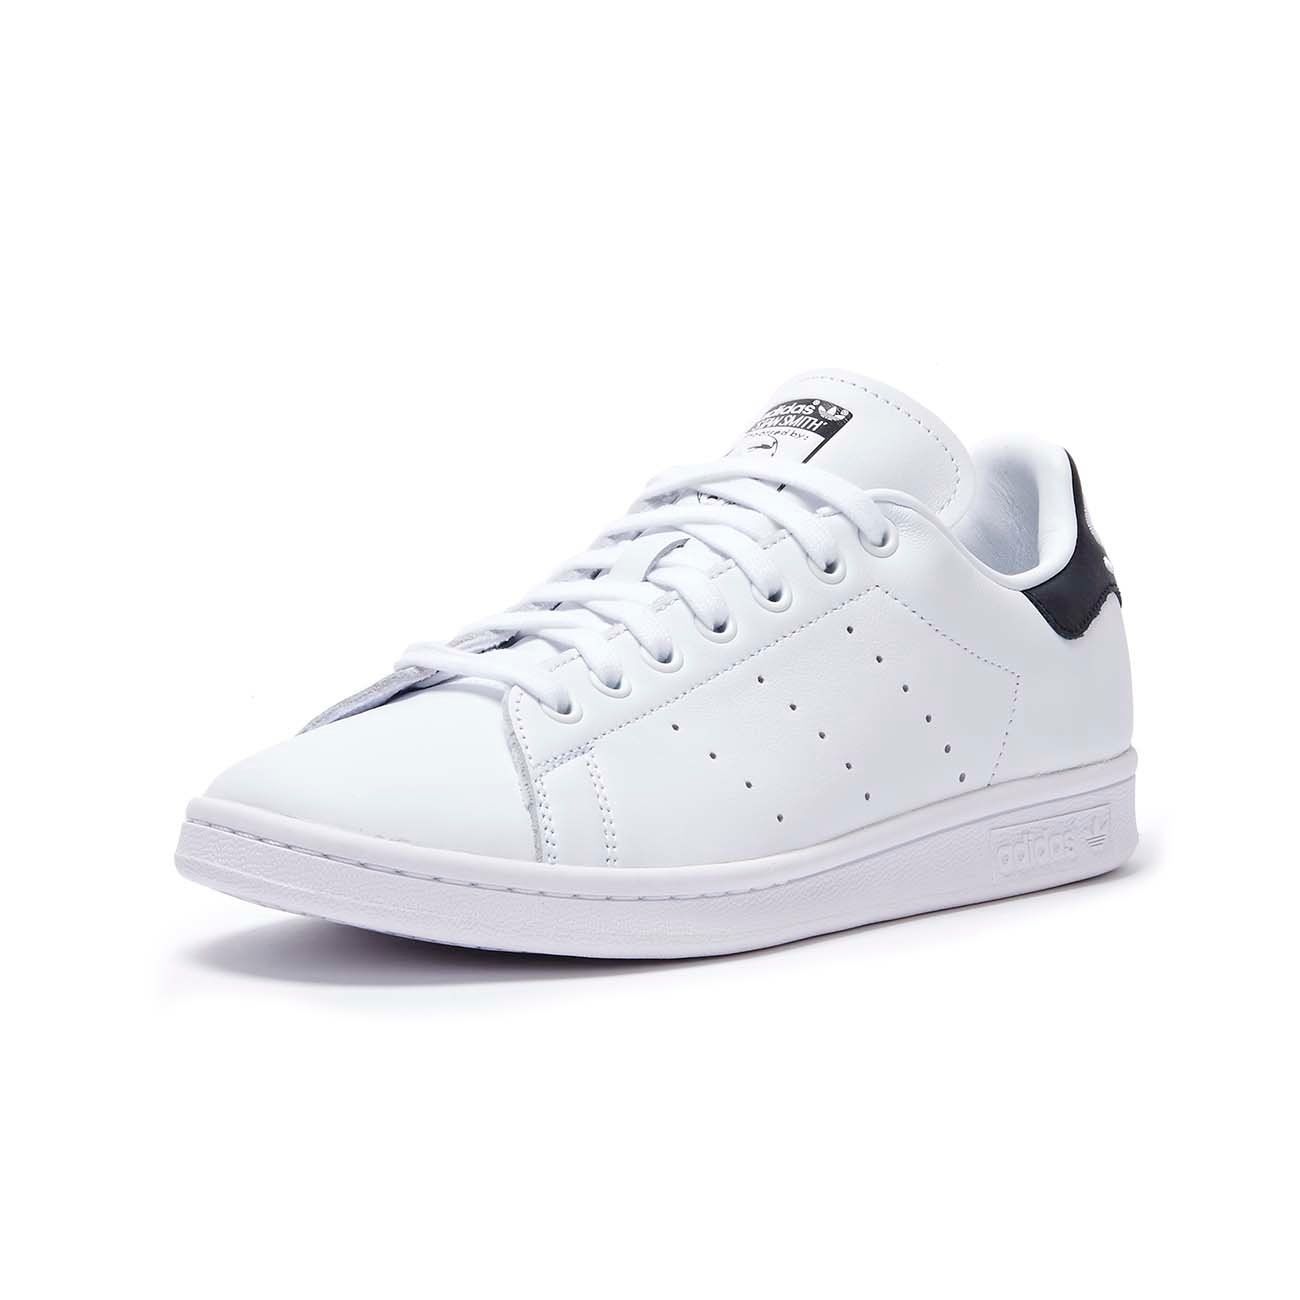 adidas Originals Stan Smith sneakers in white and navy | ASOS